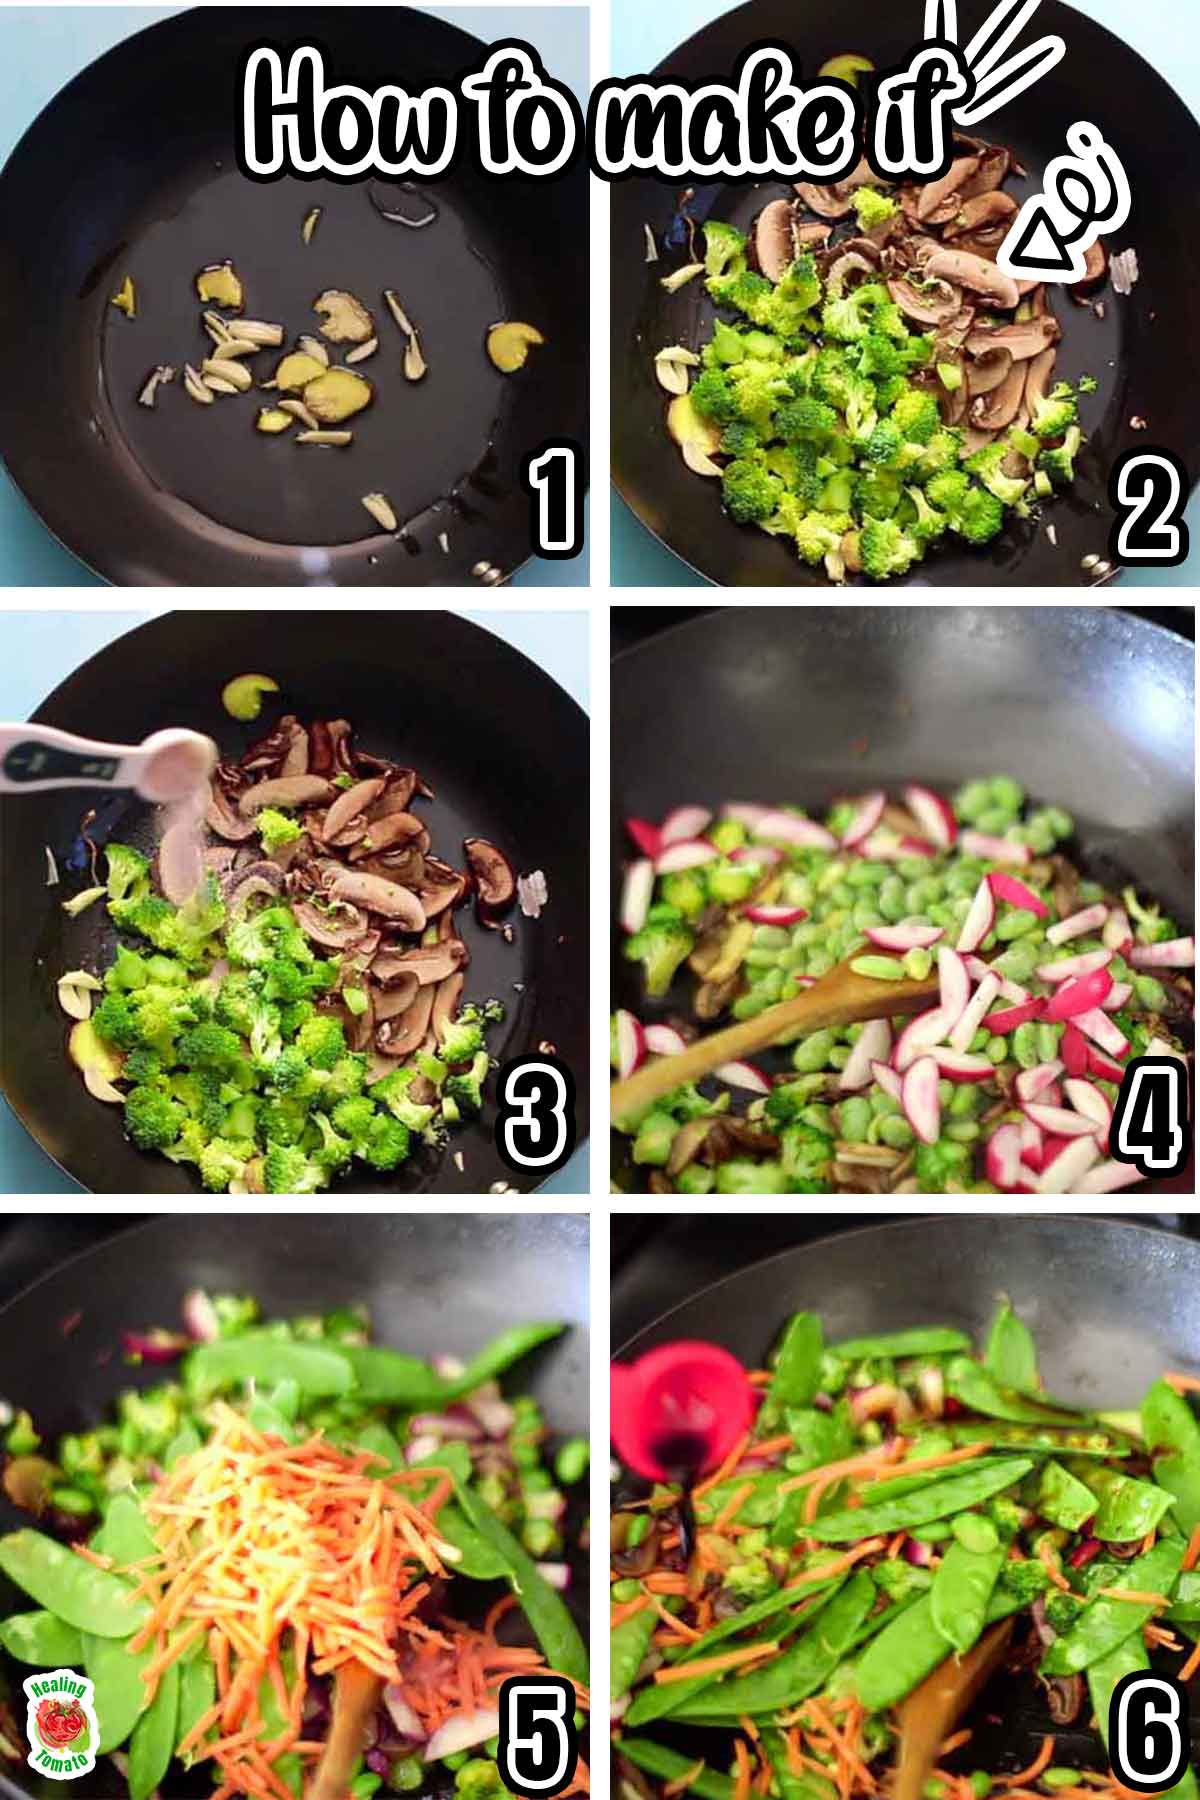 Collage of 6 images that shows how to make this stir fry recipe